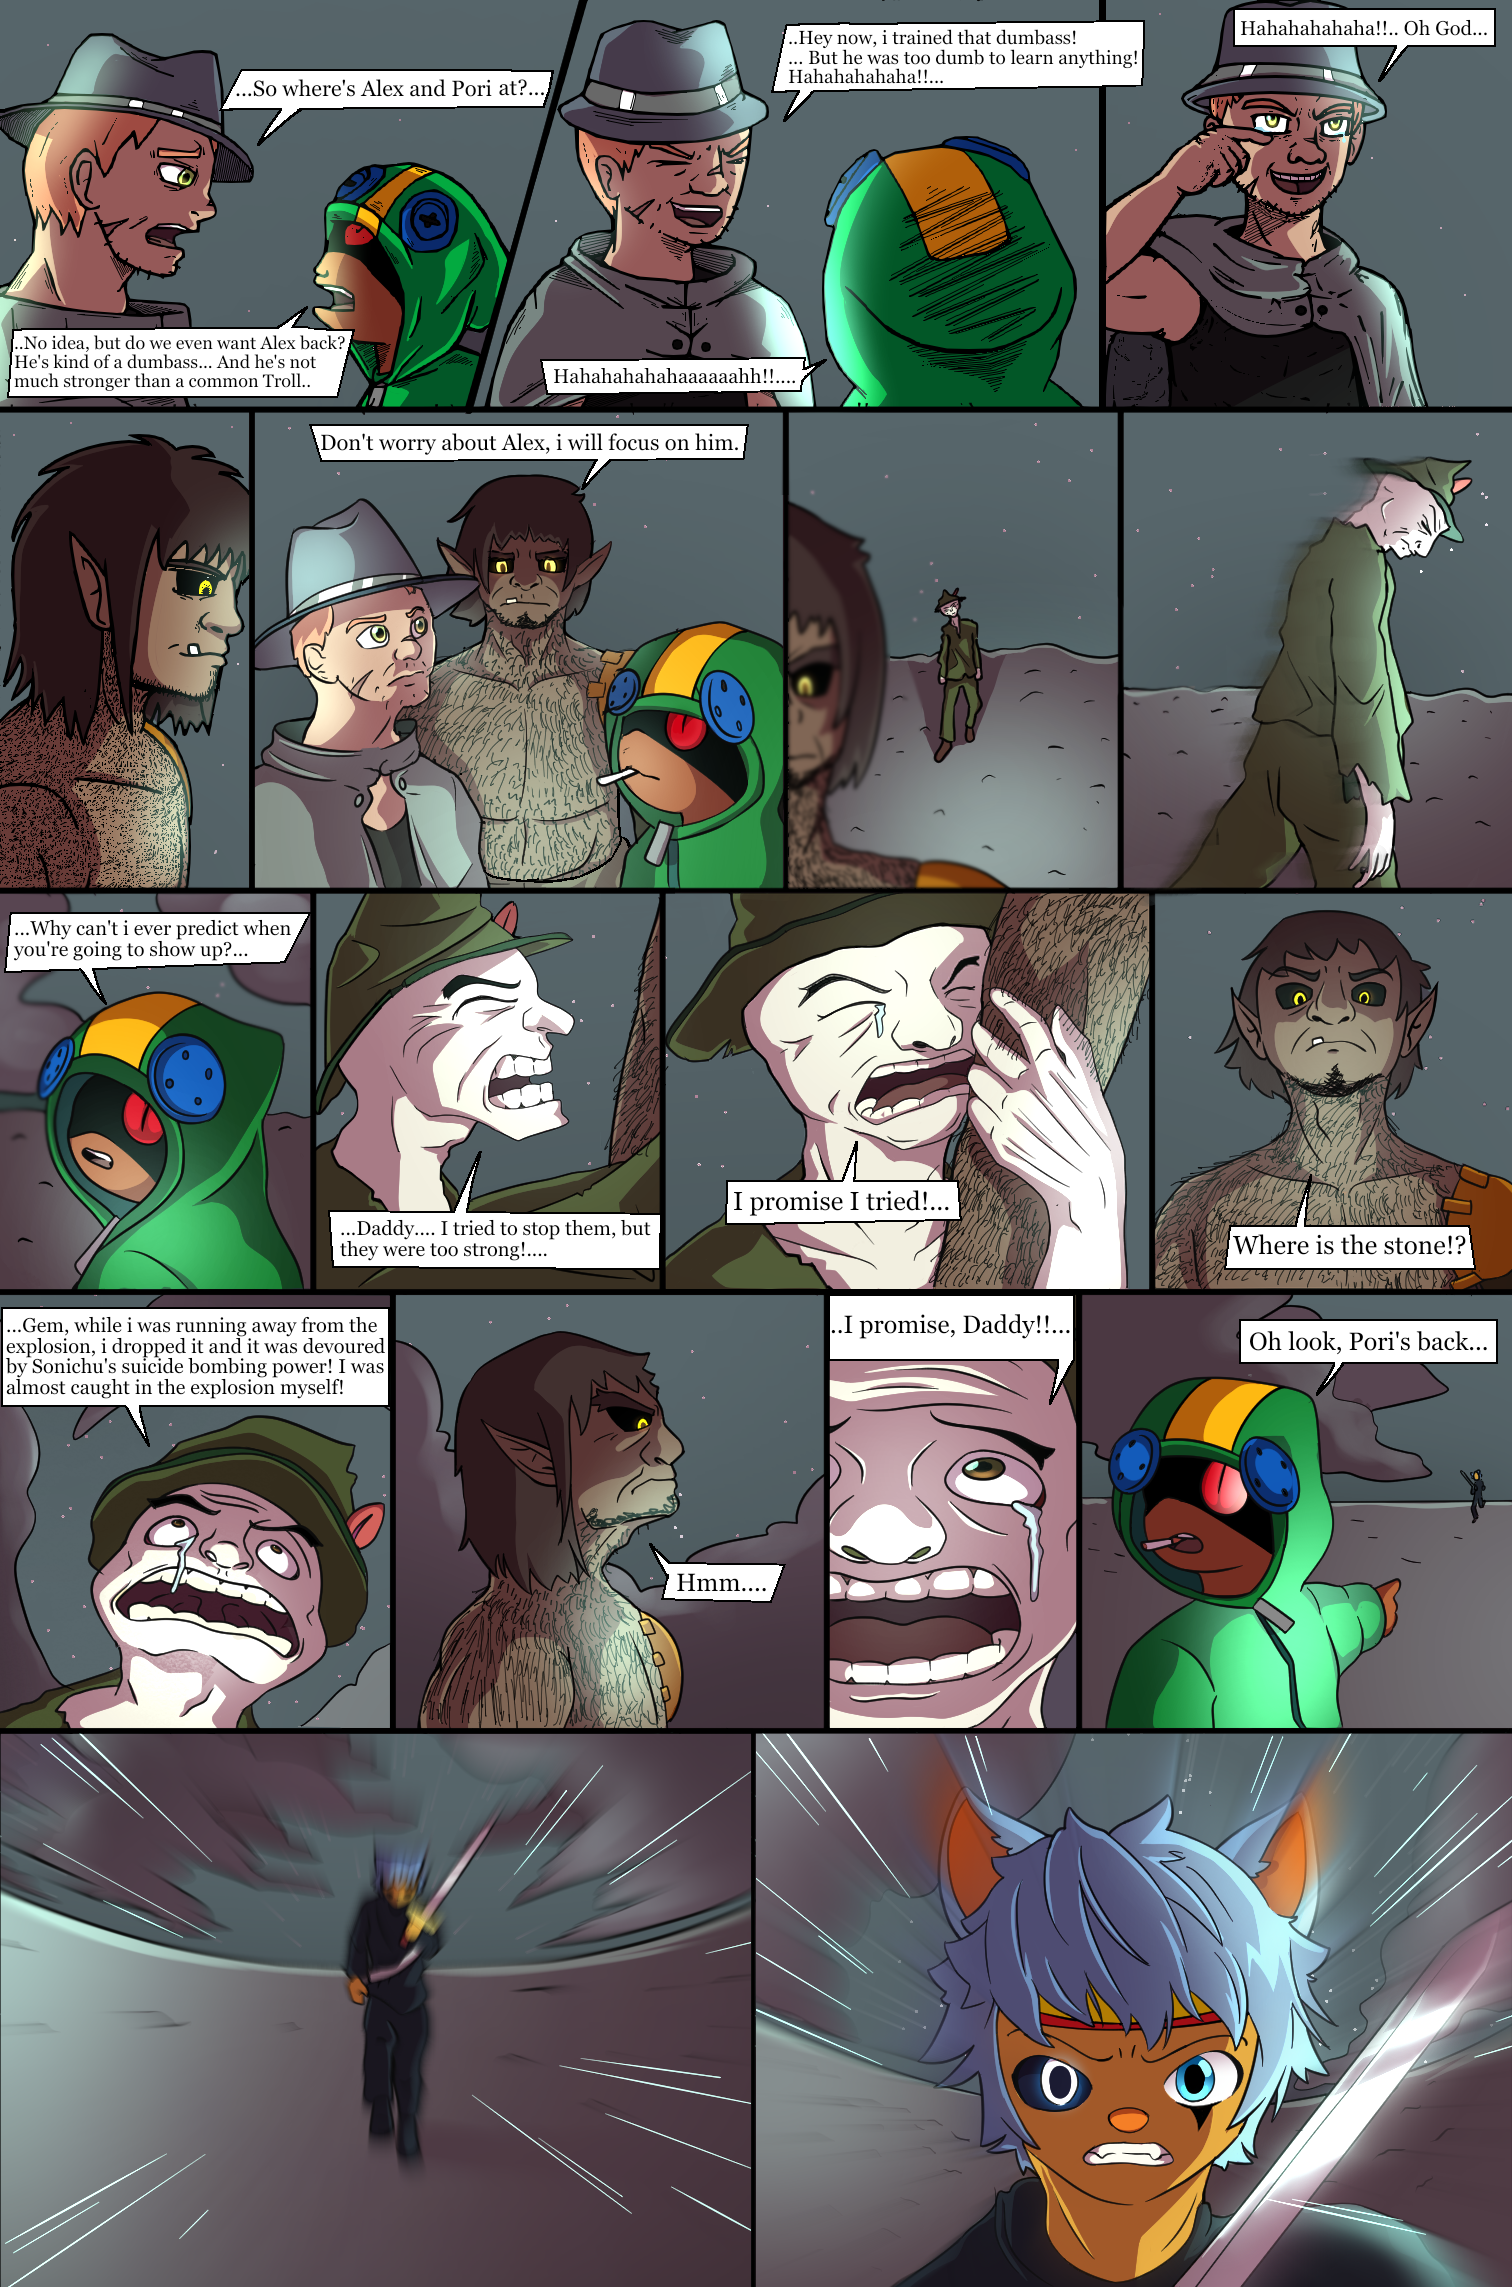 ch25/pg30.png. If you're seeing this, enable images. Or, perhaps we have a website issue. Try refreshing, if unsuccessful email c@commodorian.org with a detailed description of how you got here.